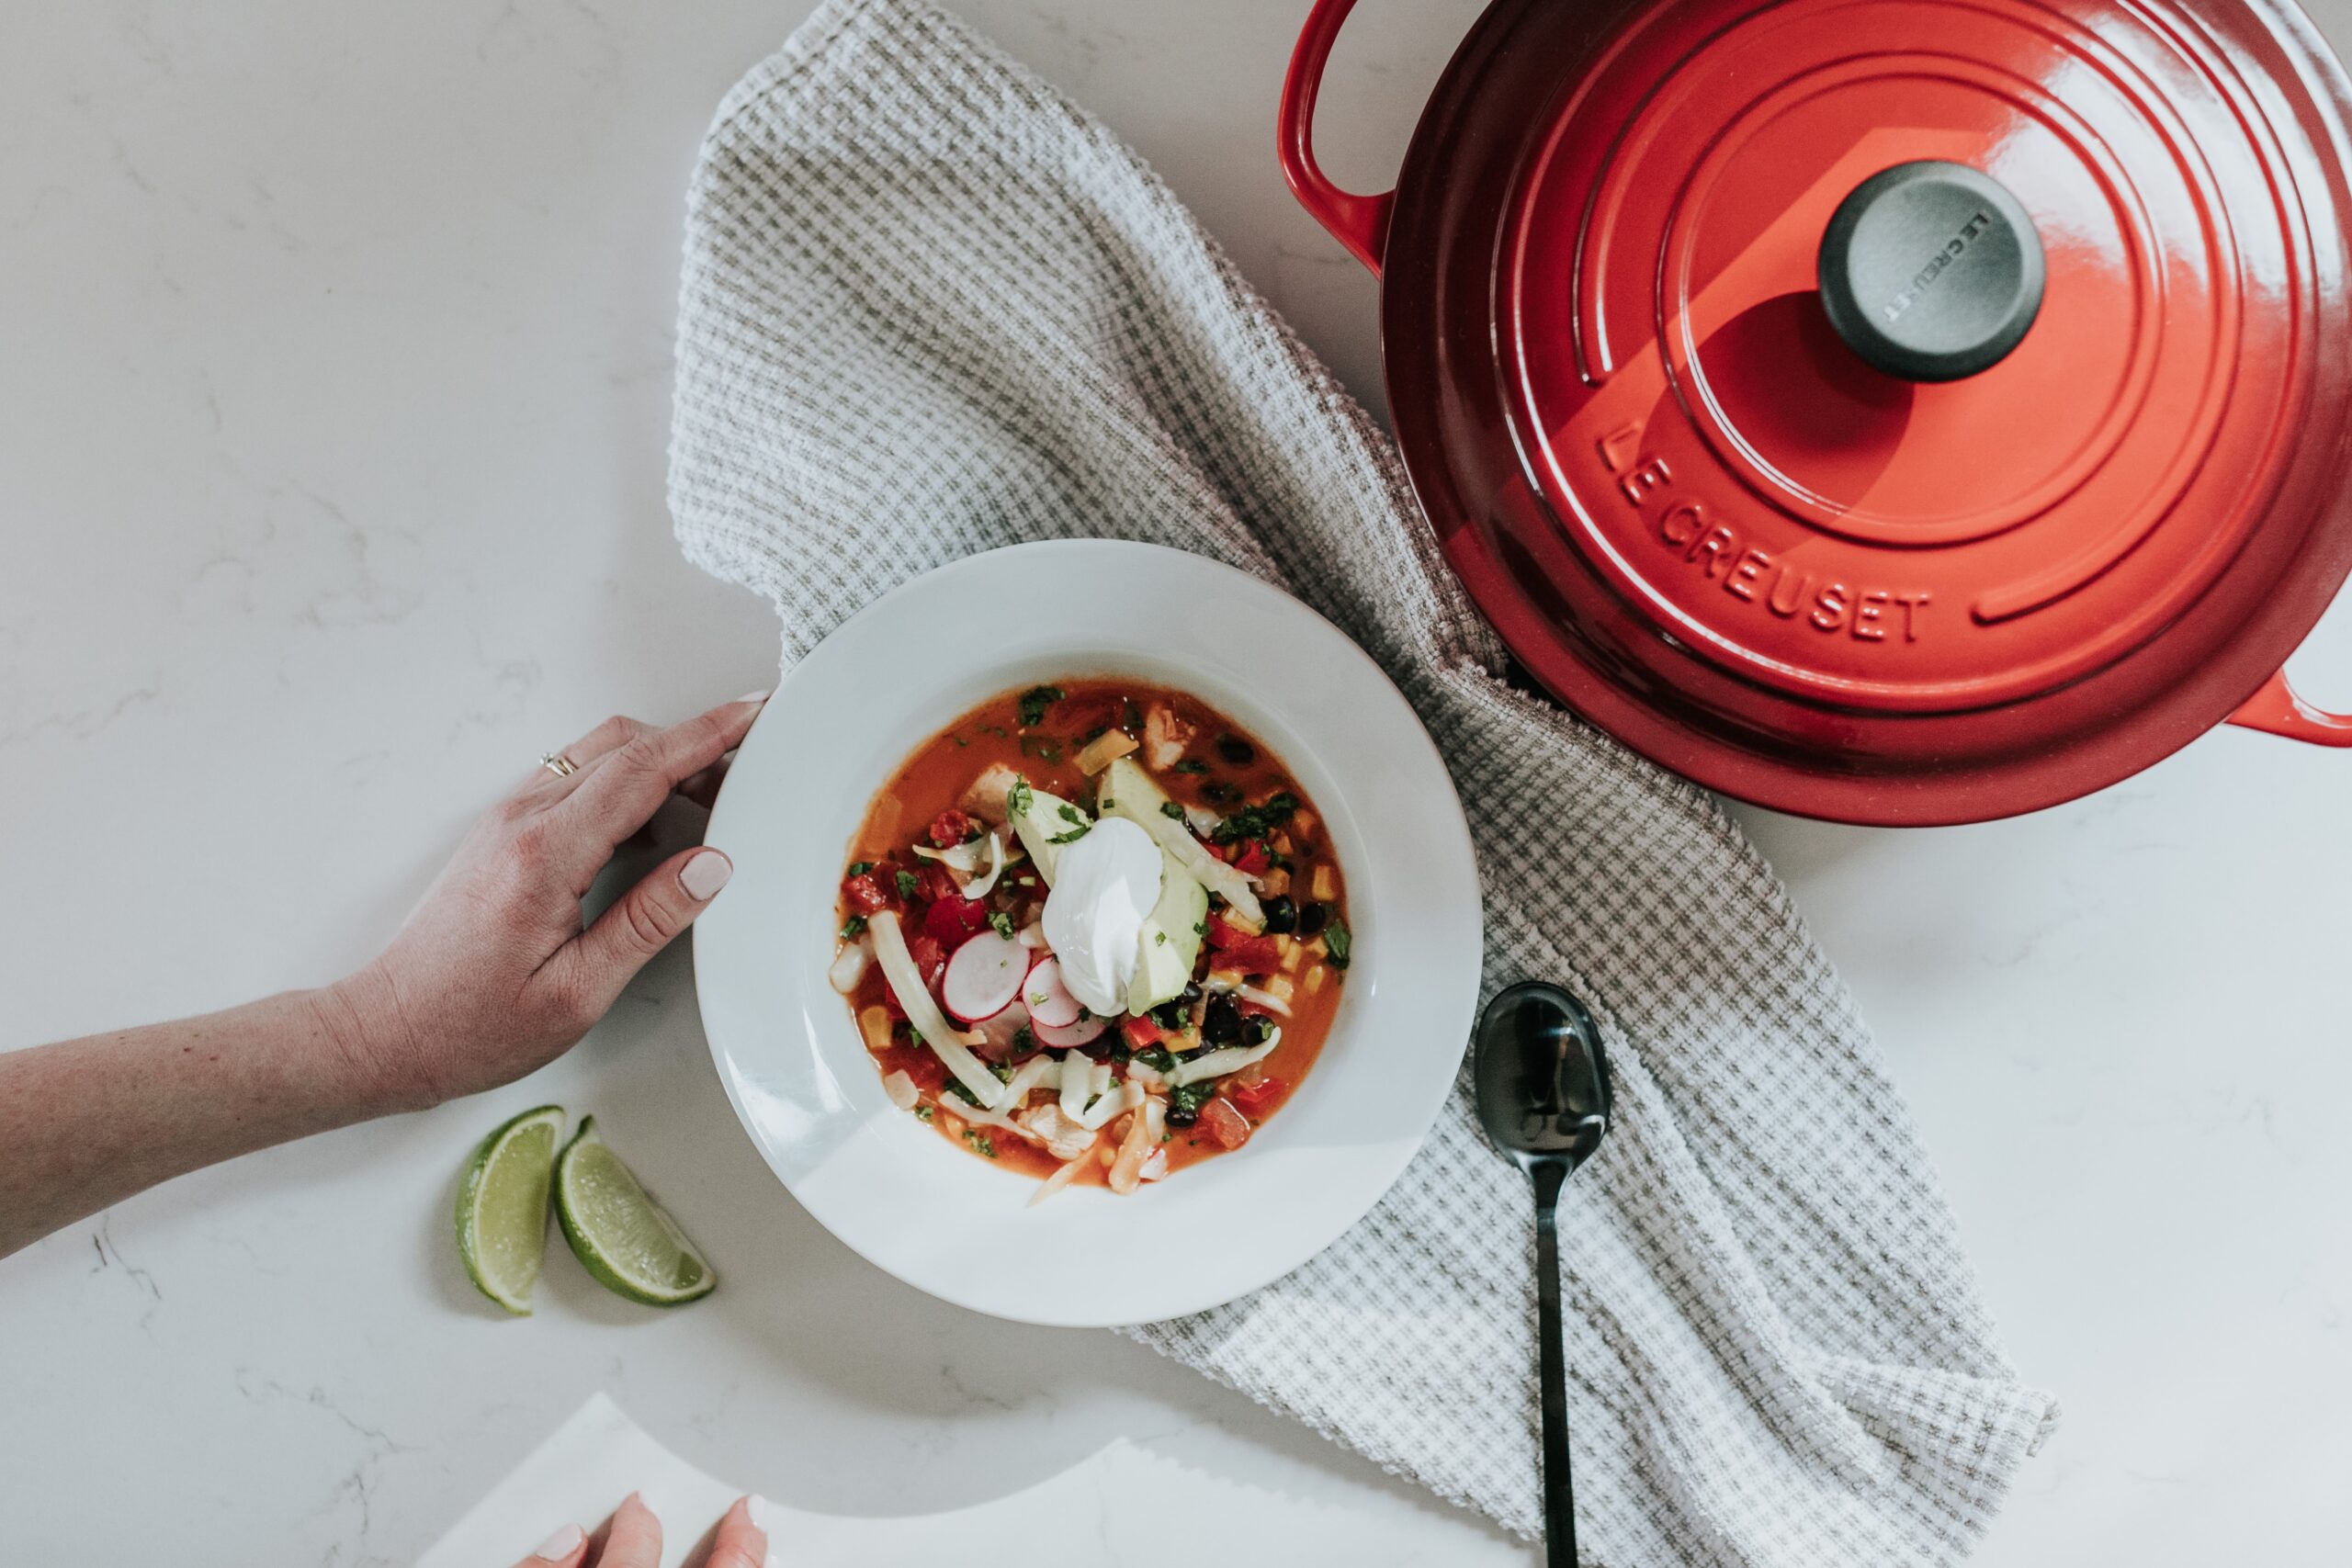 Share Your 15-minute Mexican Dish That Brings The Taste Of Mexico To Your Table.